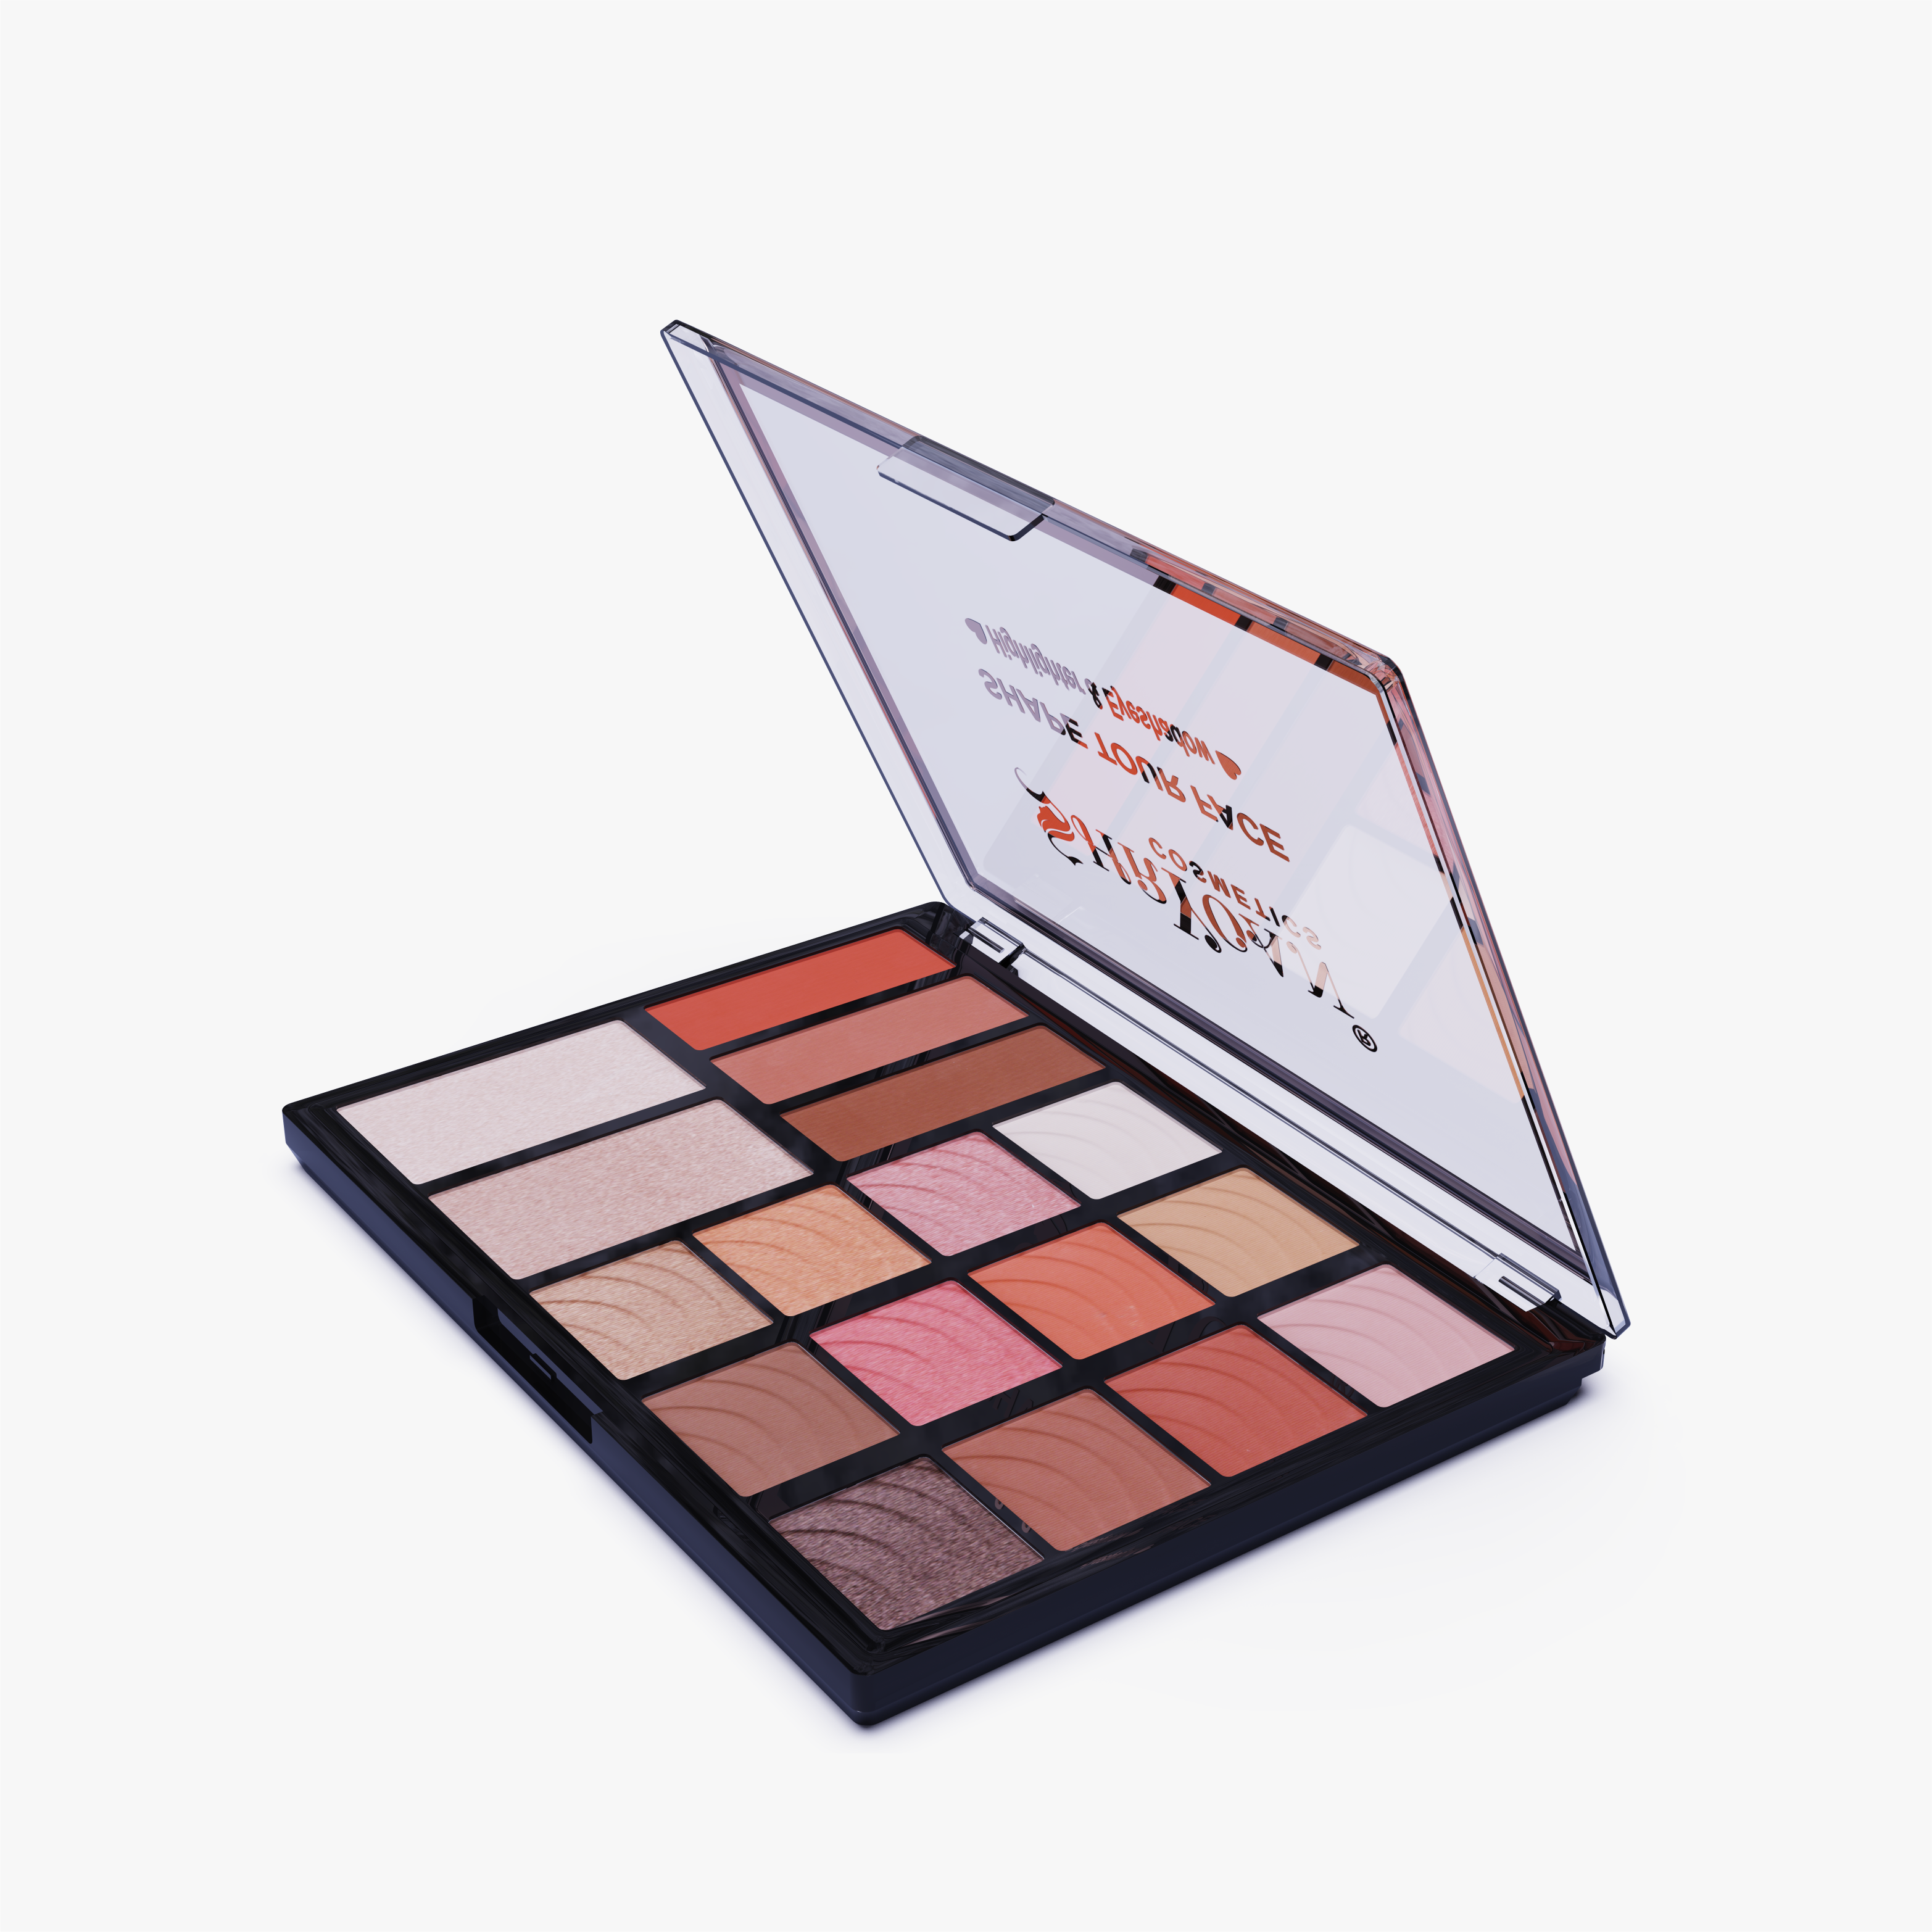 Shryoan Shape Your Face 15+2 Eyeshadow+Highlighter Palette